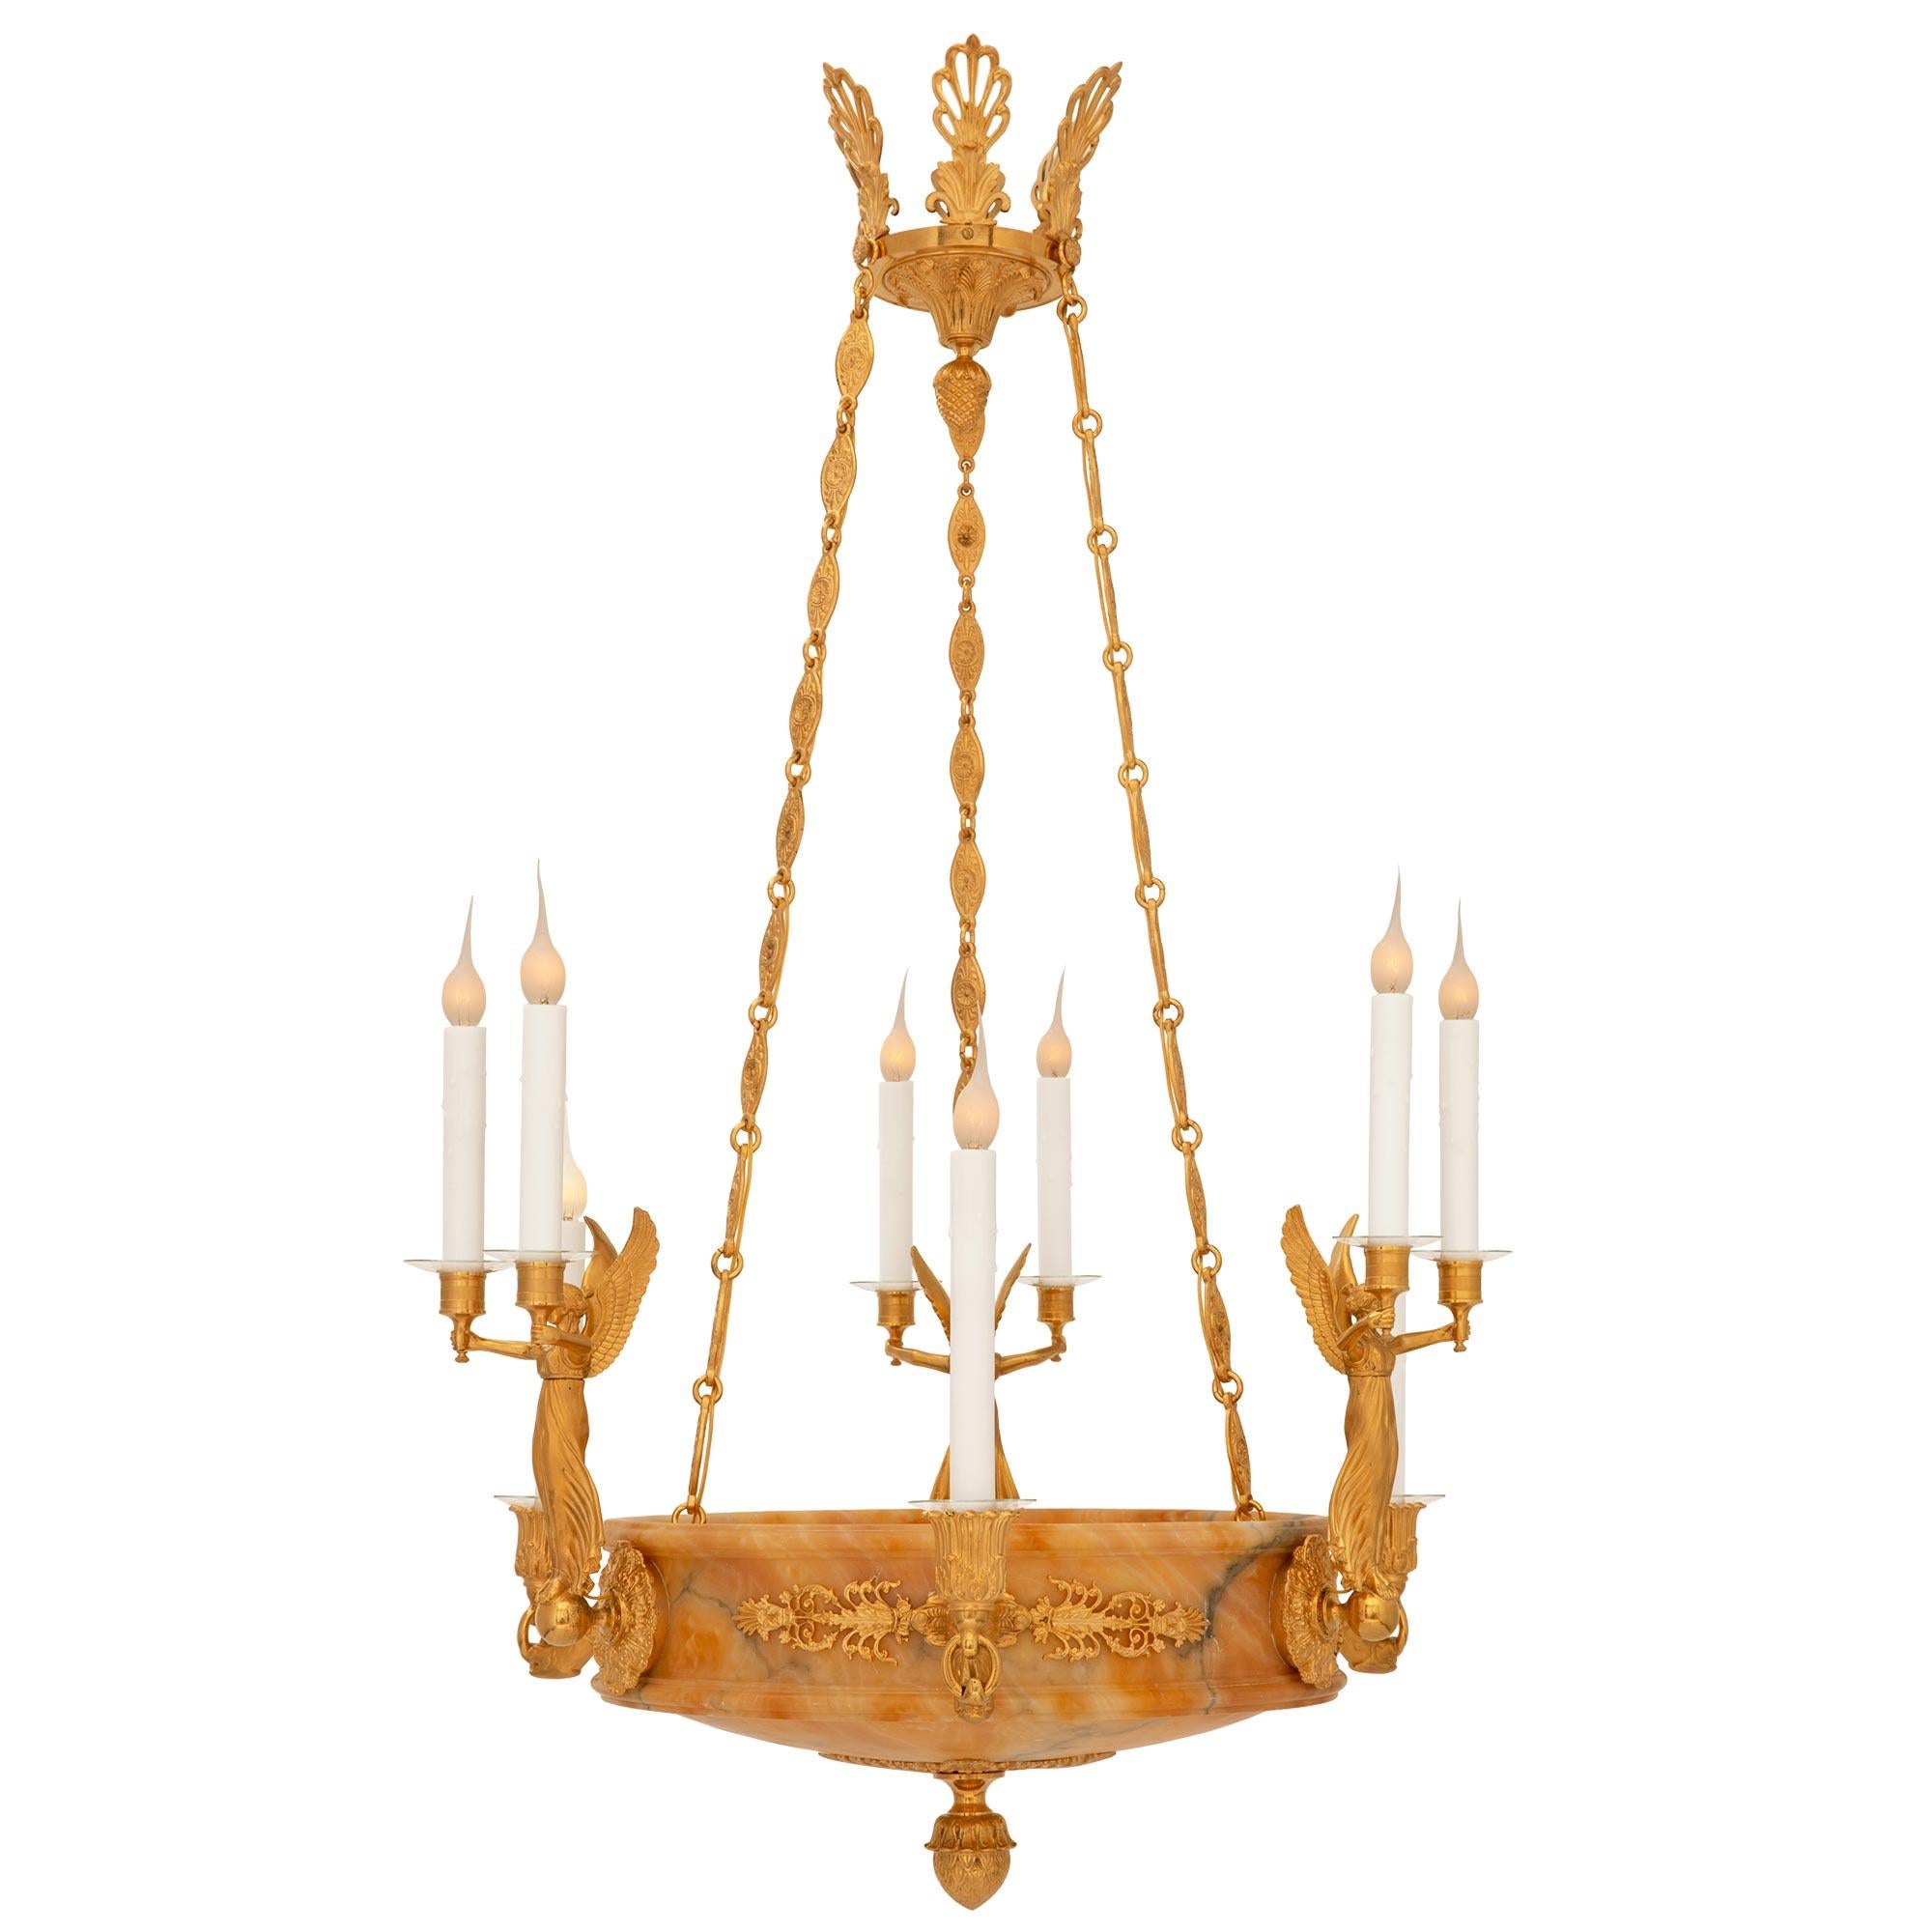 French 19th Century Empire St. Alabaster and Ormolu Chandelier In Good Condition For Sale In West Palm Beach, FL